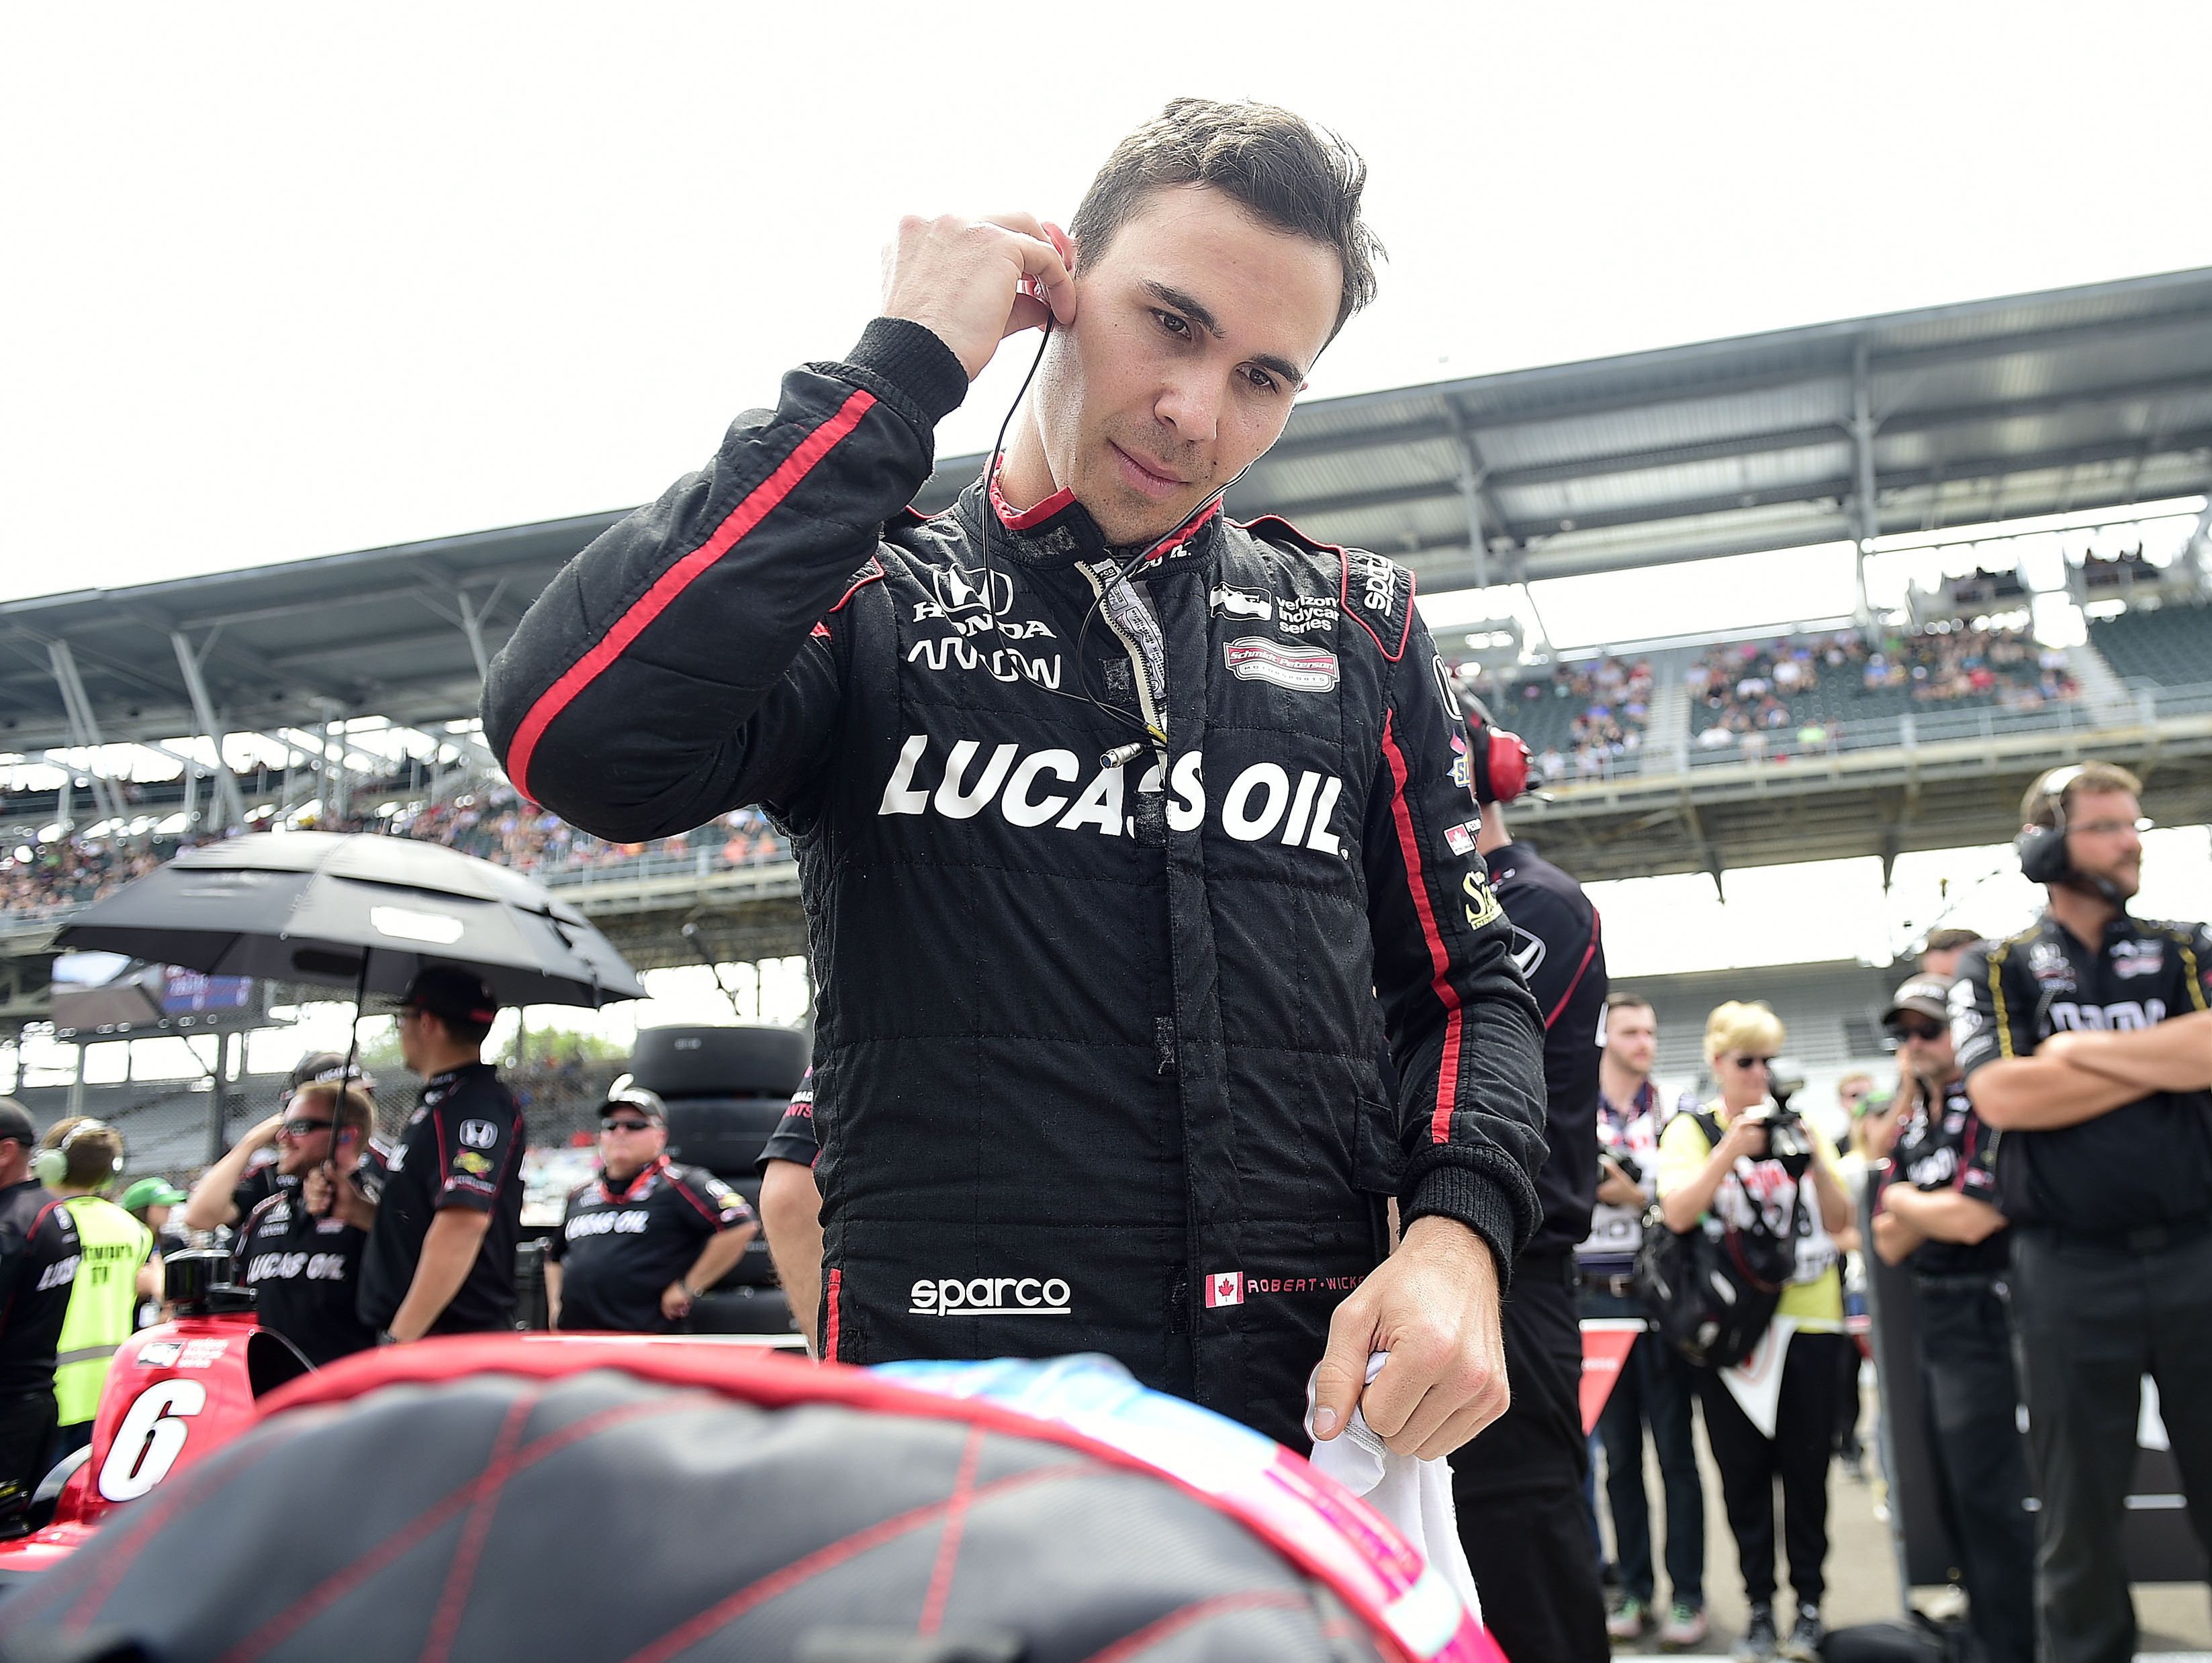 Robert Wickens wins Indy 500 rookie of the year USA TODAY Sports